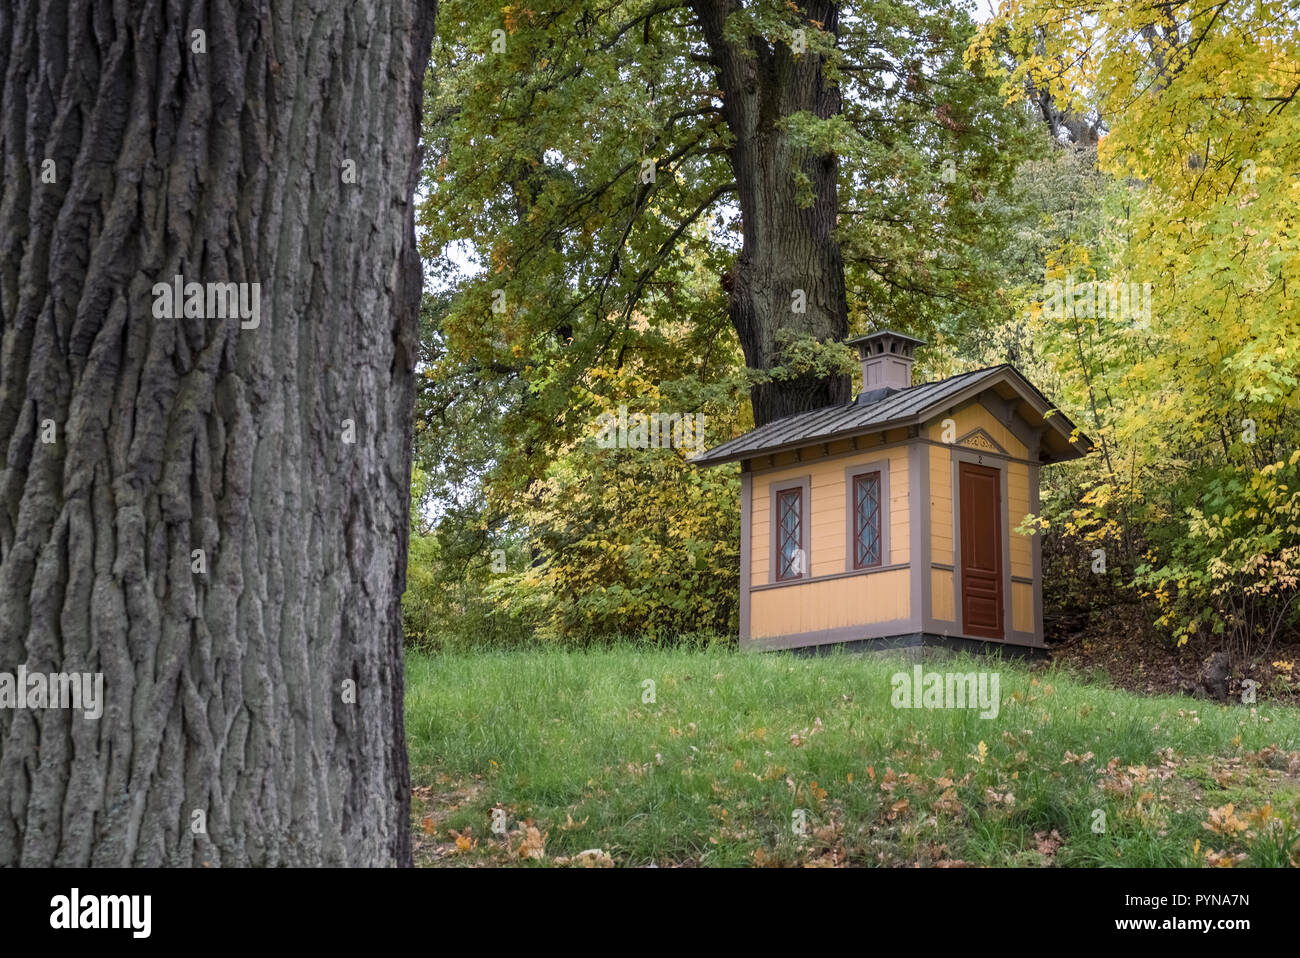 Small wooden shed structure, Djurgarden, Stockholm, Sweden Stock Photo